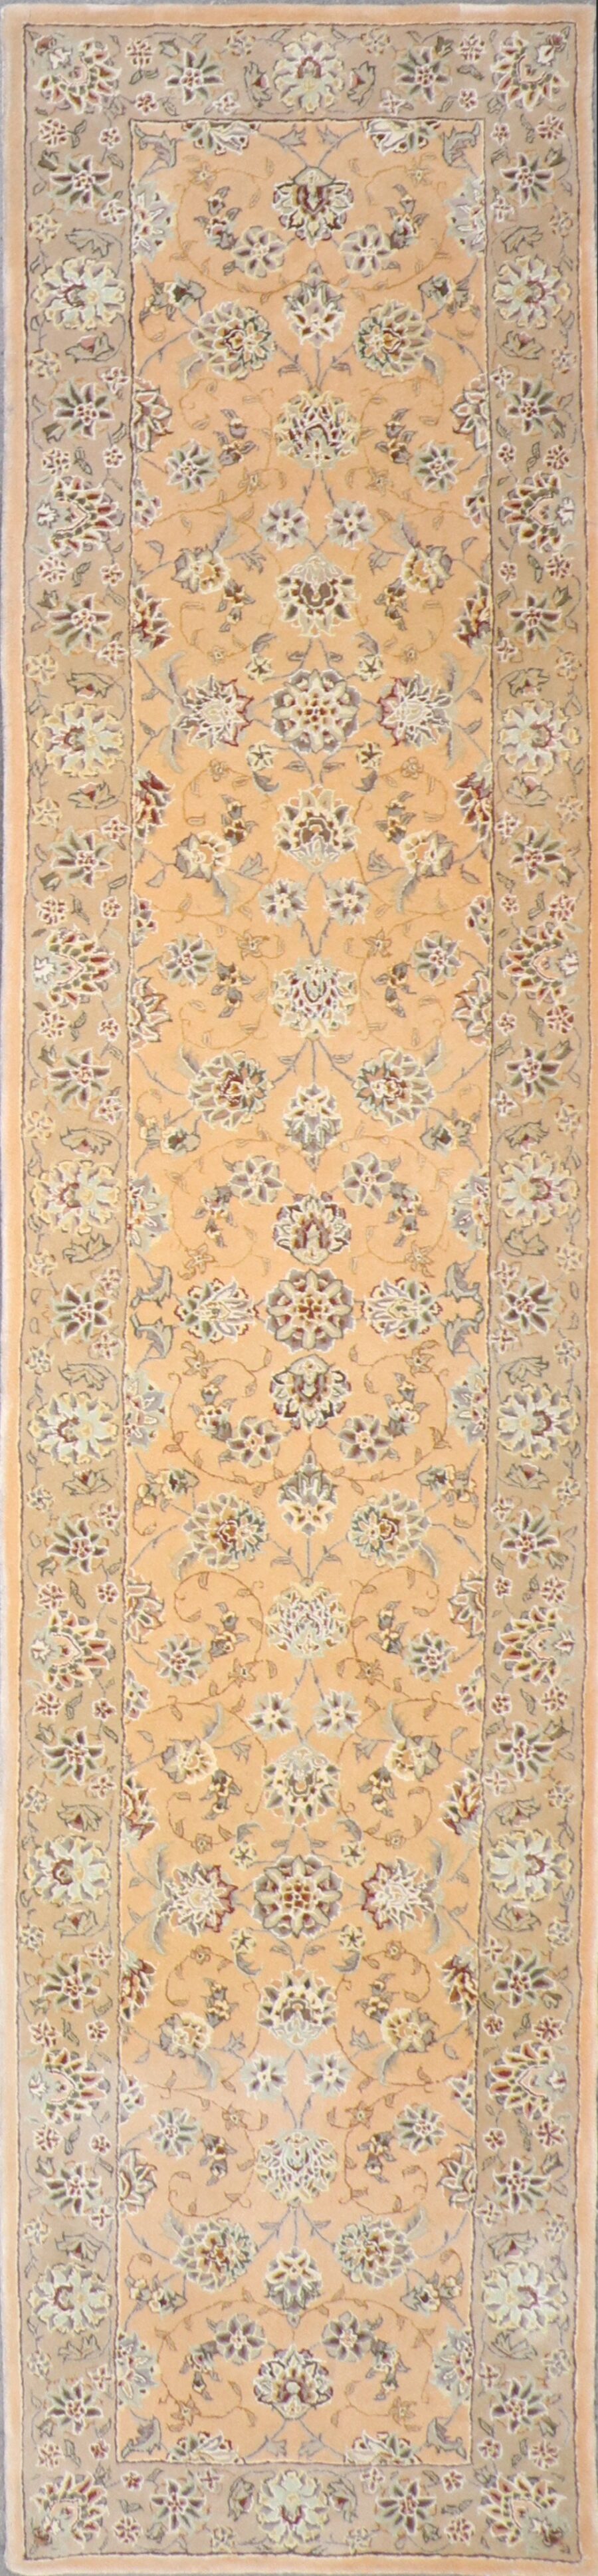 2'8"x11'7" Decorative Tabriz Wool & Silk Hand-Tufted Rug - Direct Rug Import | Rugs in Chicago, Indiana,South Bend,Granger